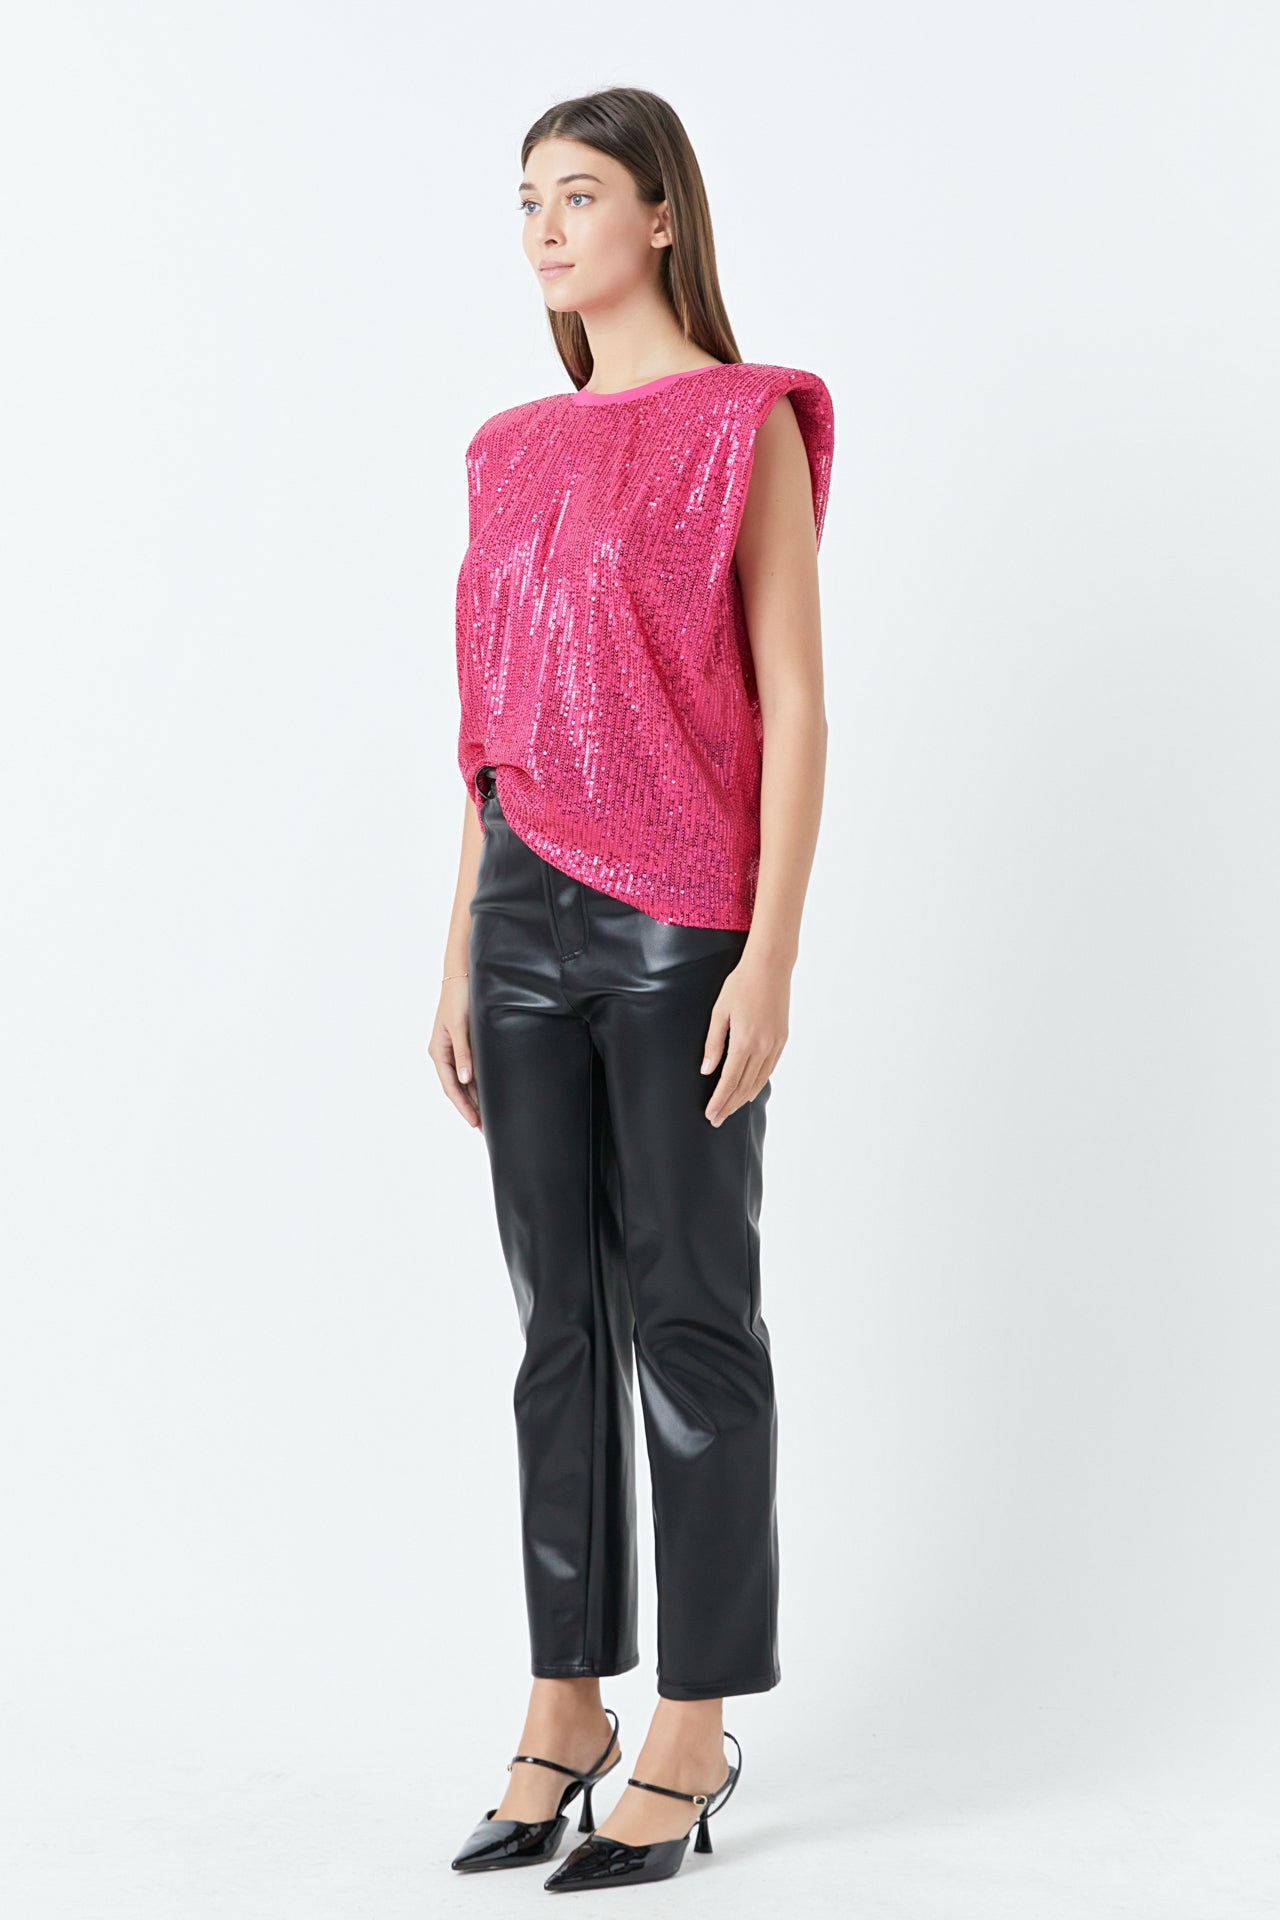 ENDLESS ROSE - Sequin Shoulder Pad Top - TOPS available at Objectrare